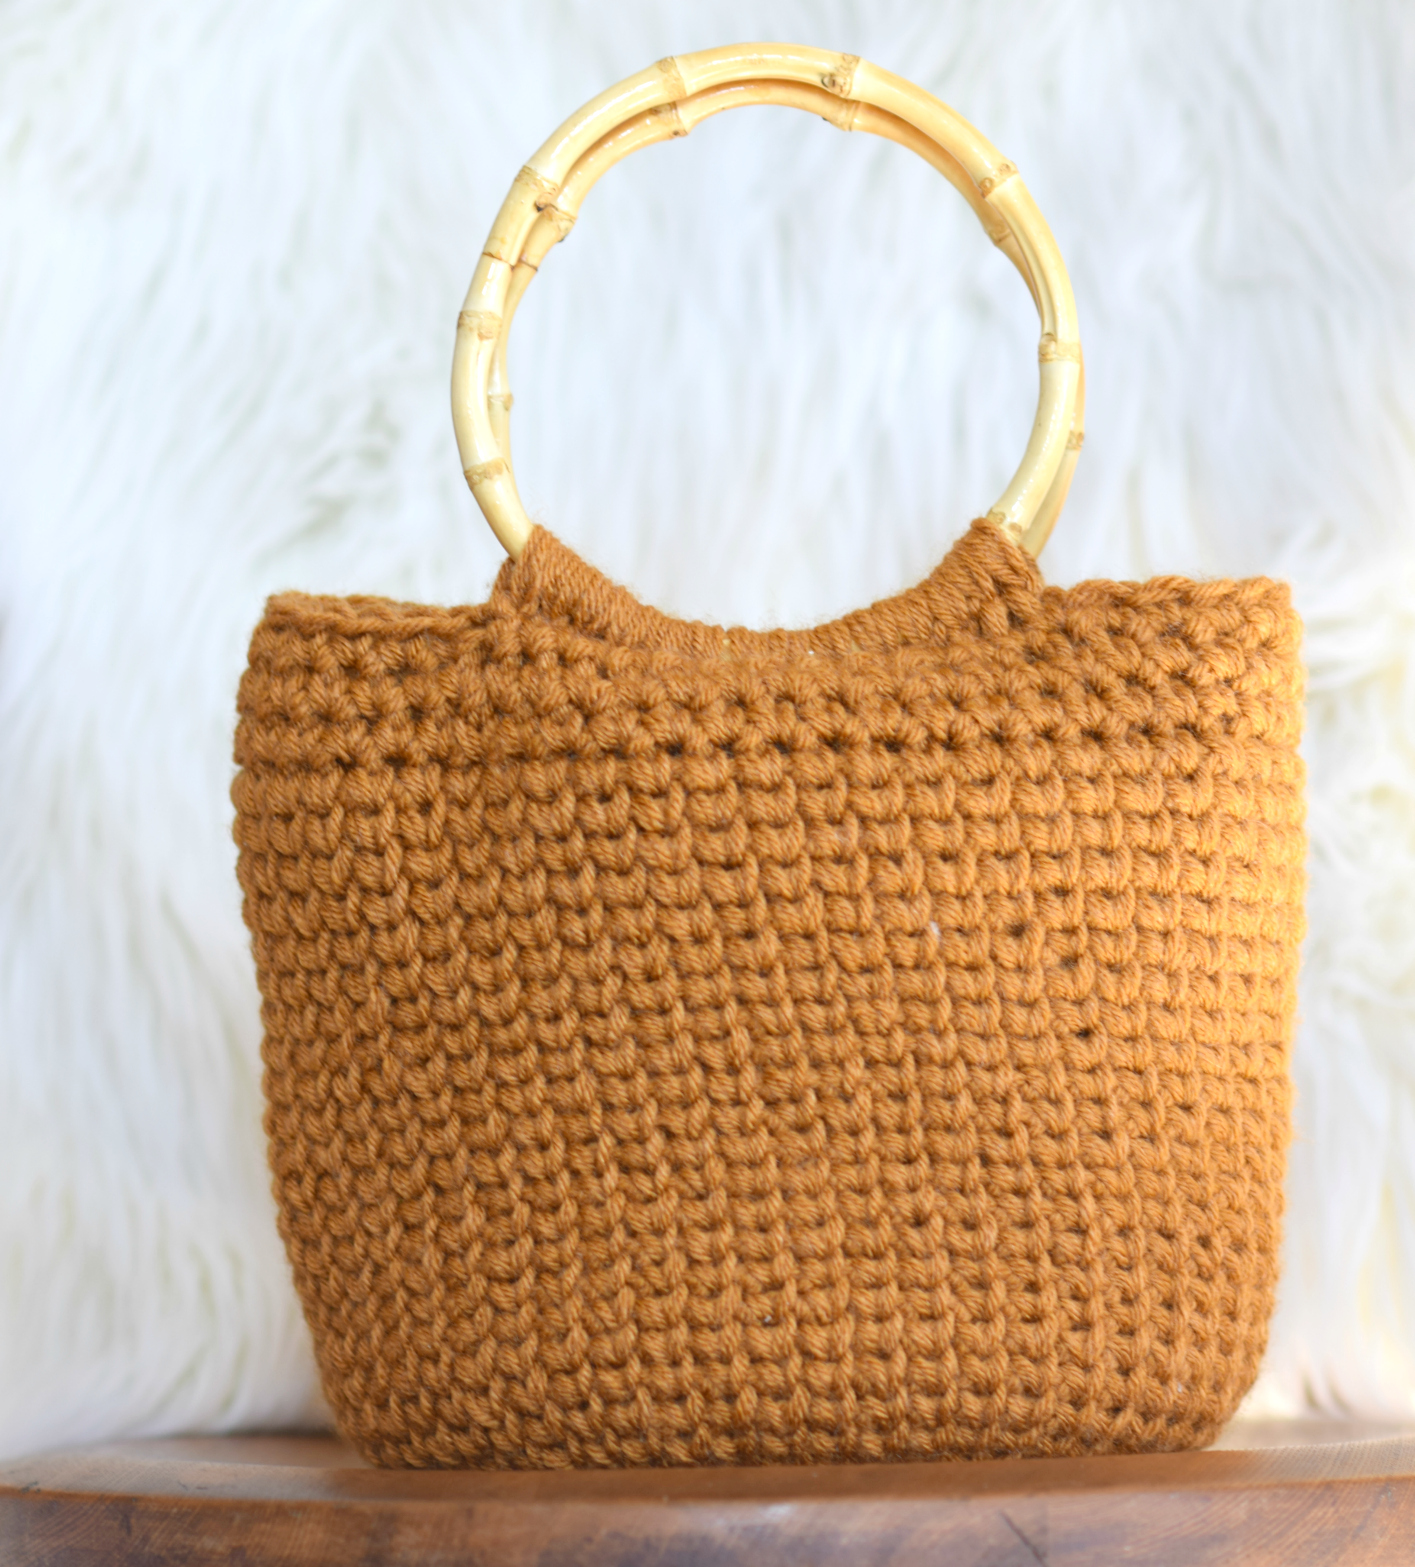 How to Make a Granny Square Bag. Free Crochet Pattern - Zeens and Roger